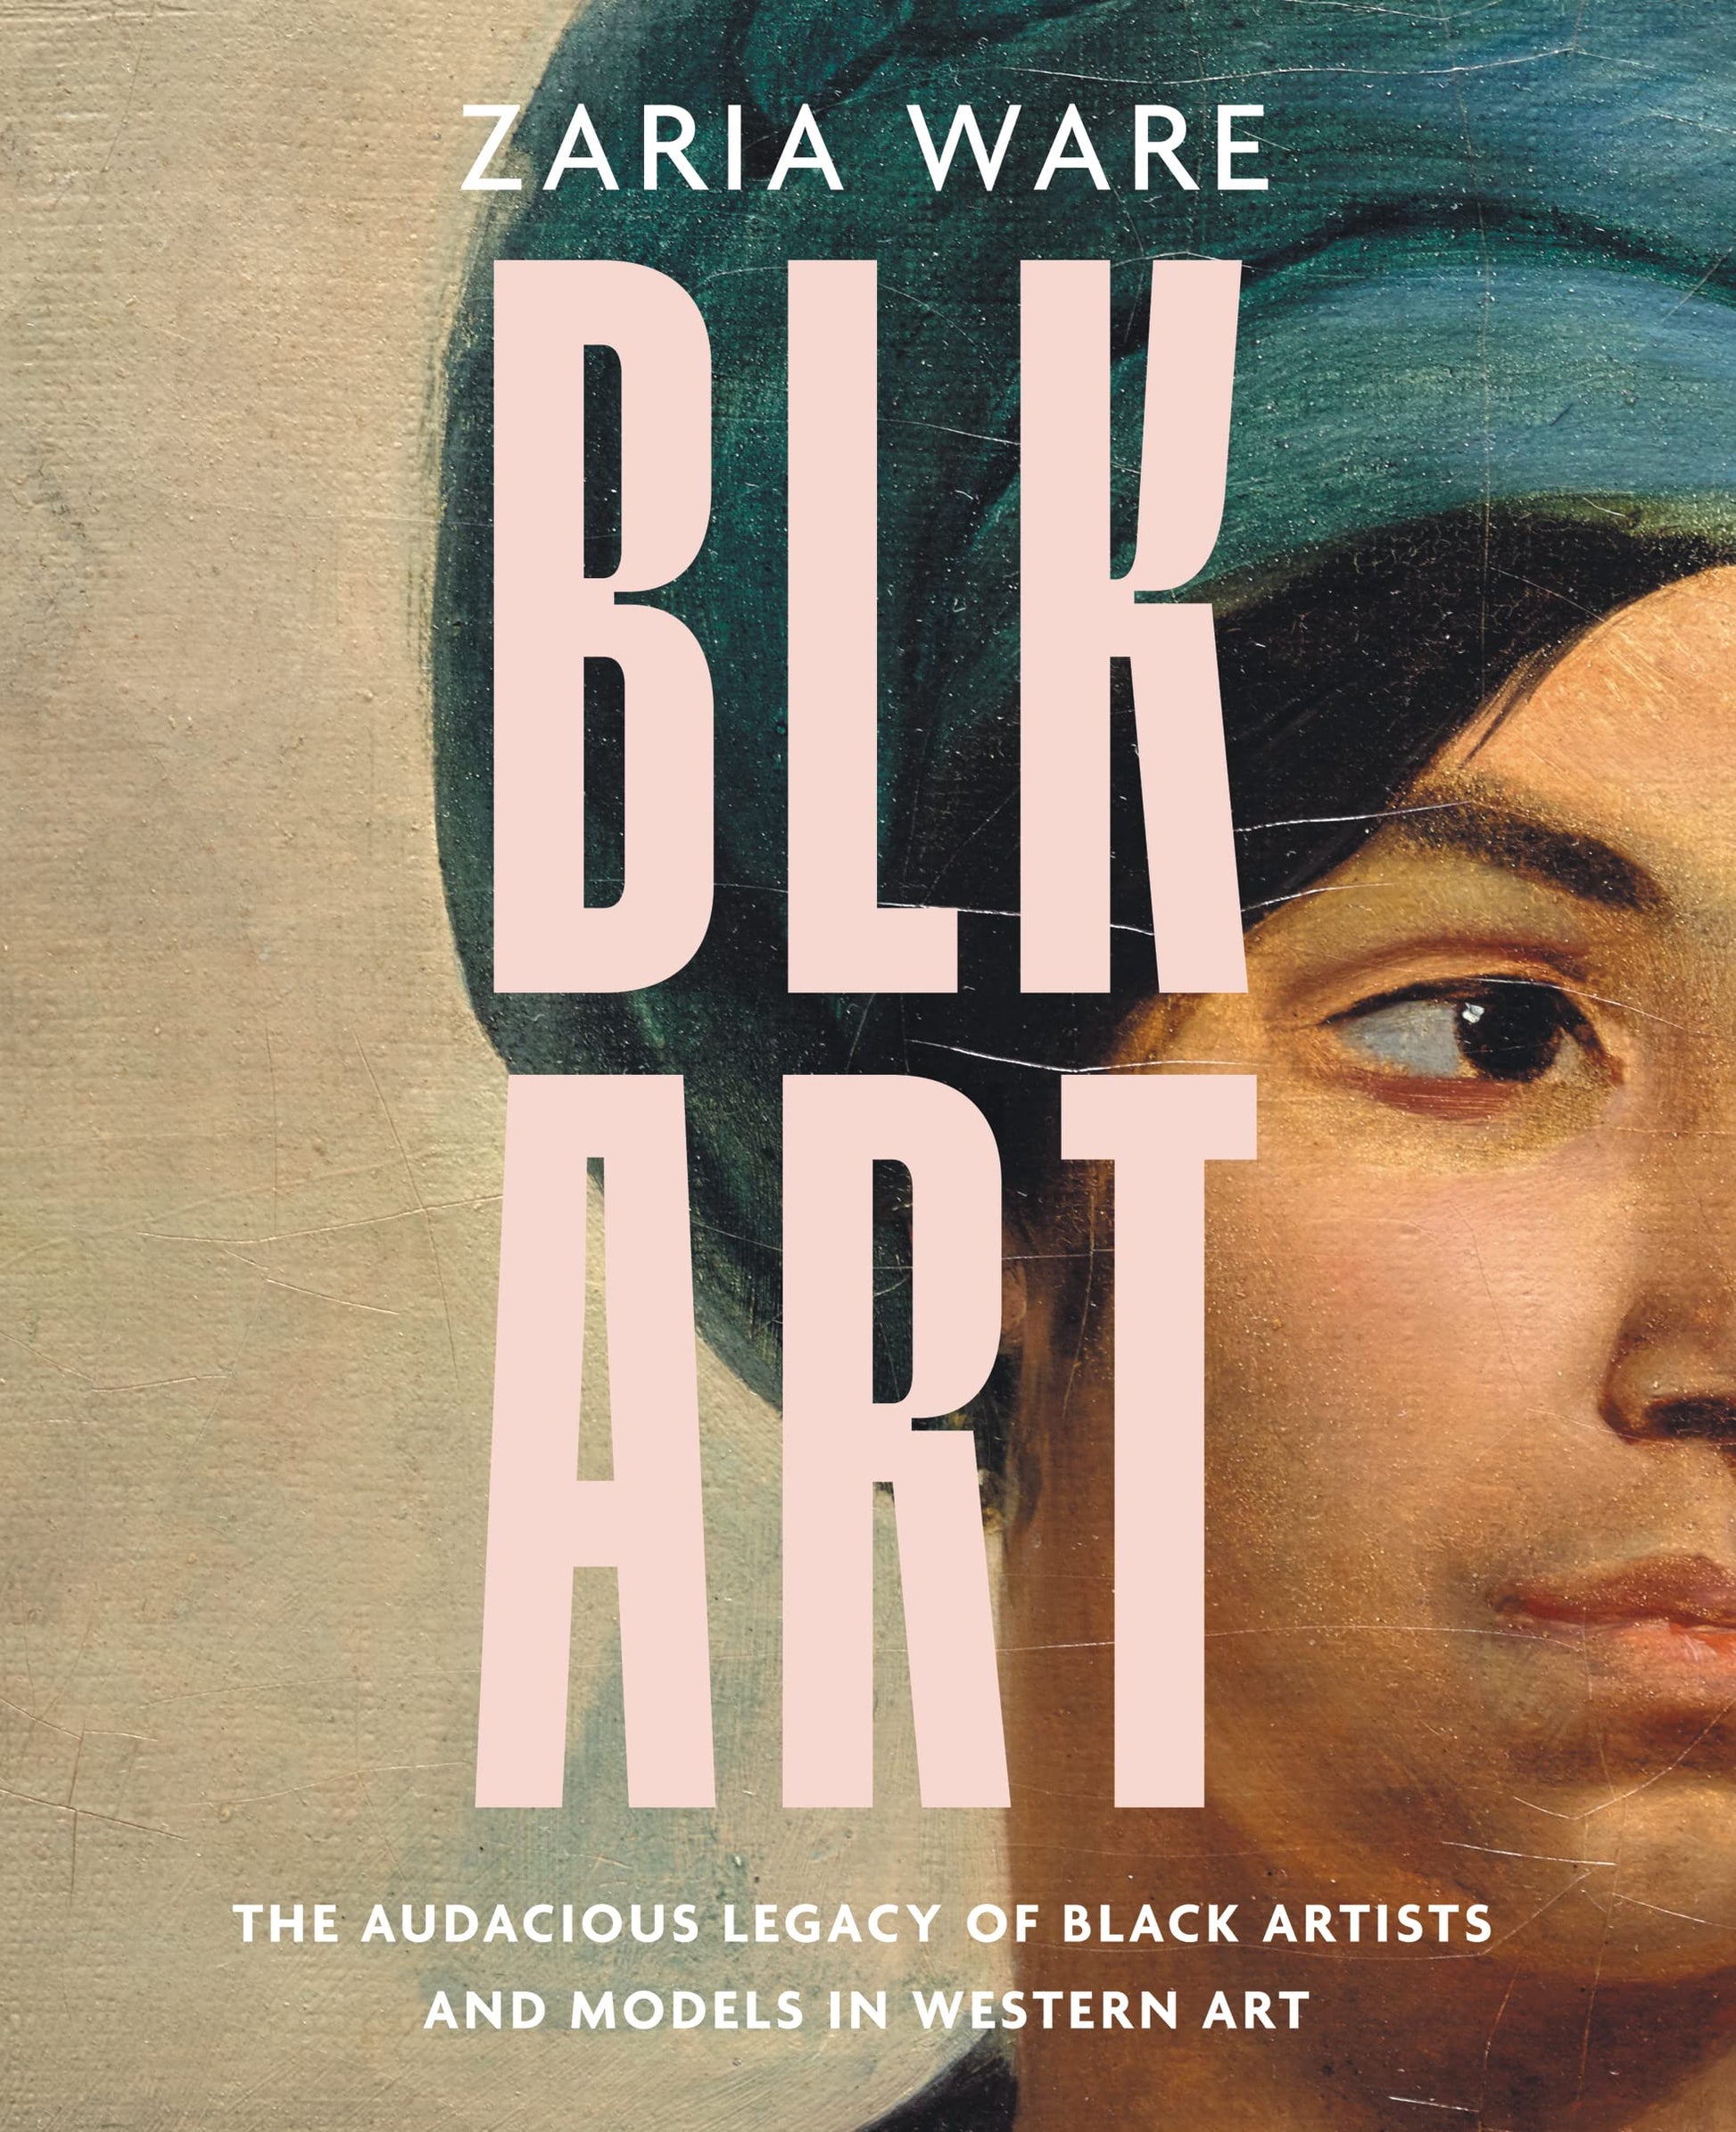 A fun and fact-filled introduction to the dismissed Black art masters and models who shook up the world. Captivating and informative, BLK ART is an essential work that elevates a globally dismissed legacy to its proper place in the mainstream art canon.